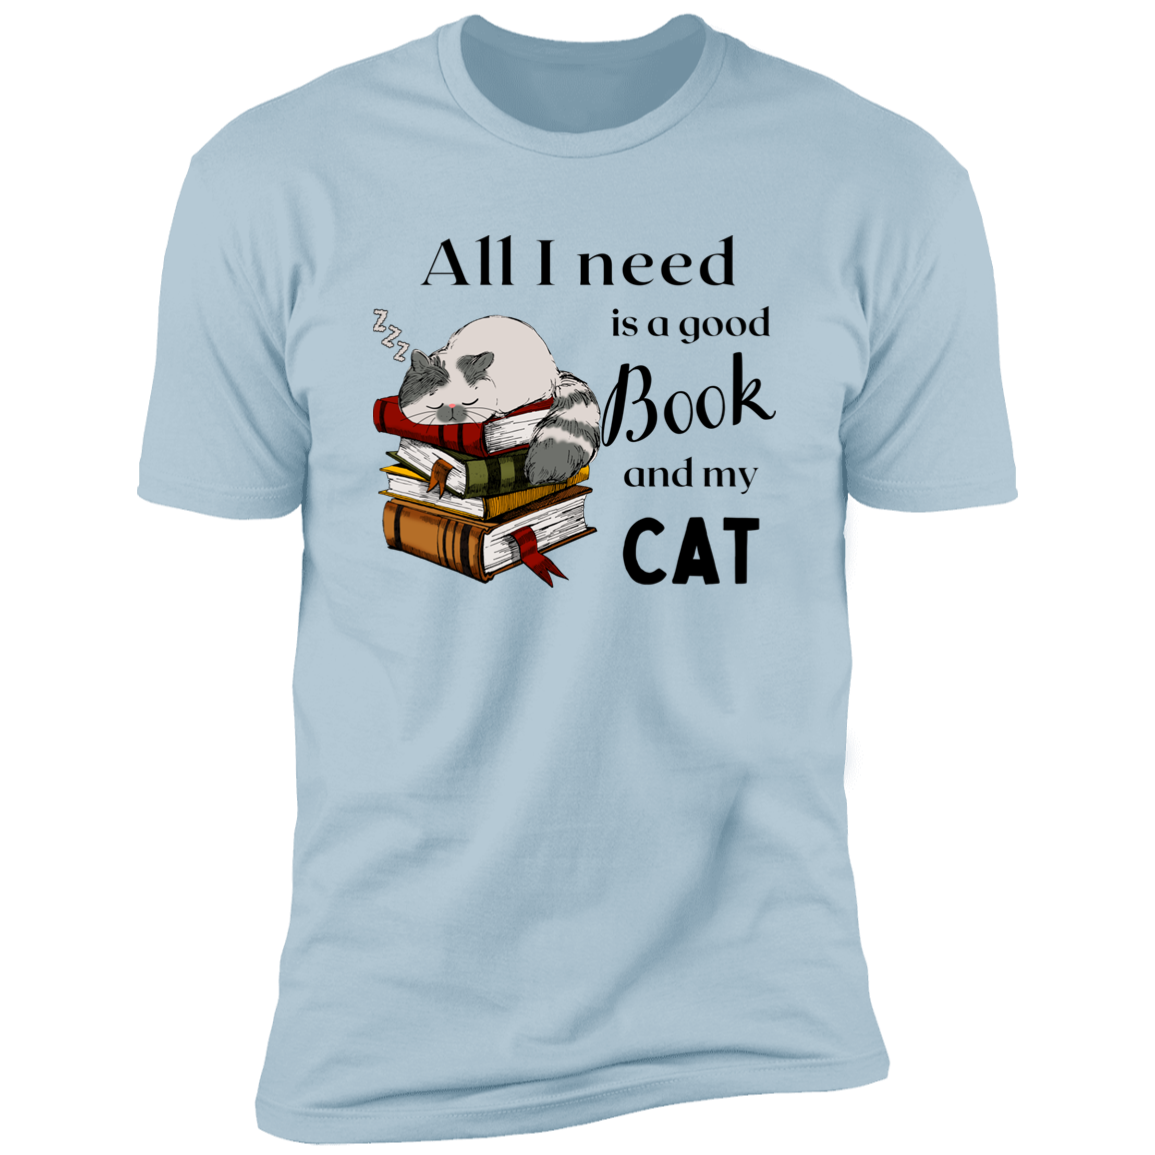 All I Need is a Good Book and My Cat t-shirt for humans, in light vlue